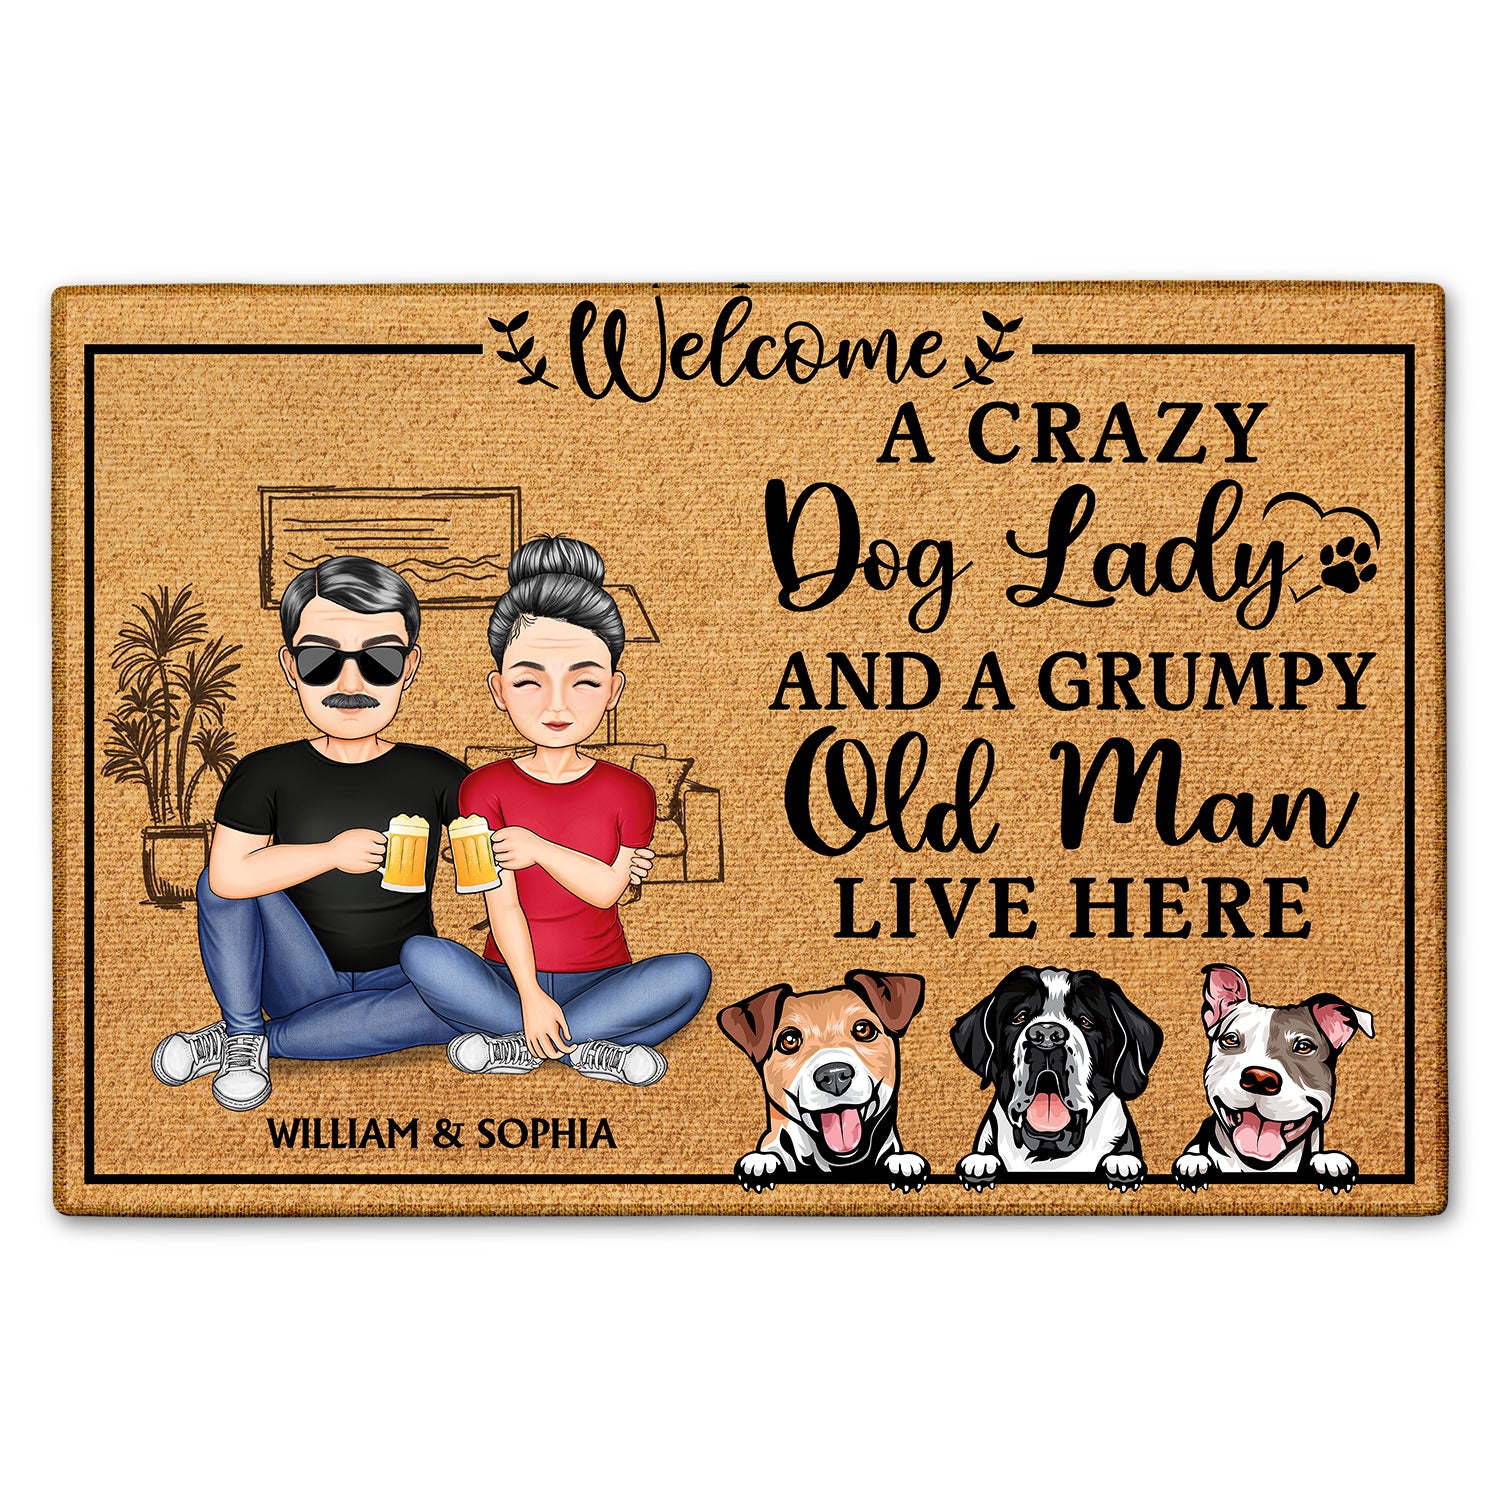 A Crazy Dog Cat Lady And A Grumpy Old Man Live Here - Gift For Family, Couple, Pet Lovers - Personalized Custom Doormat